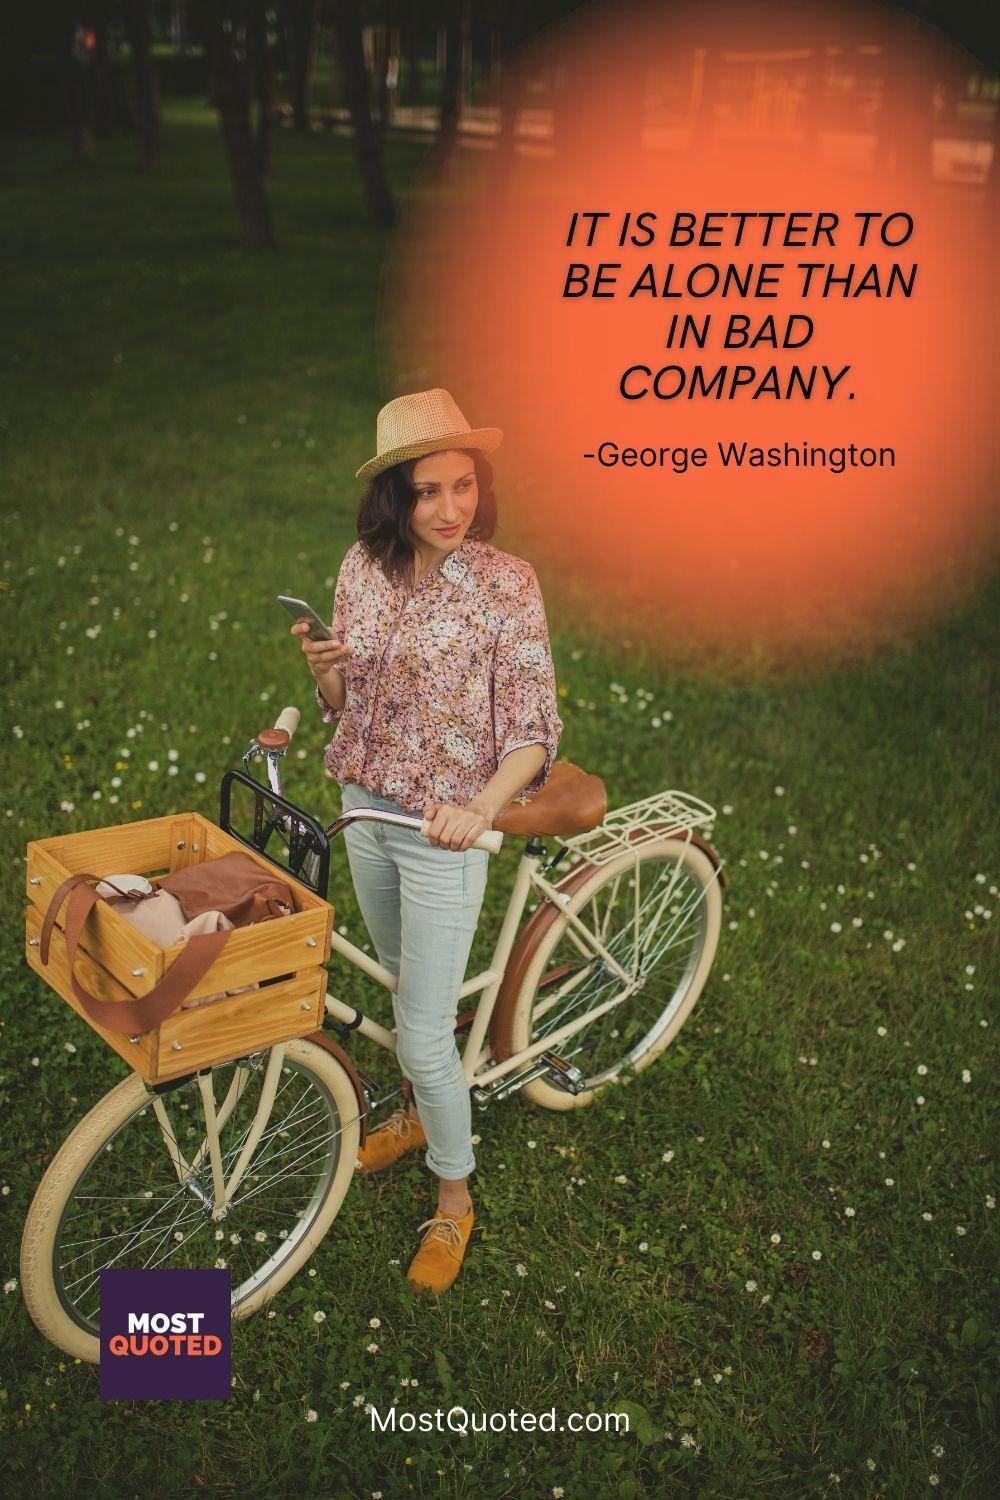 It is better to be alone than in bad company. - George Washington